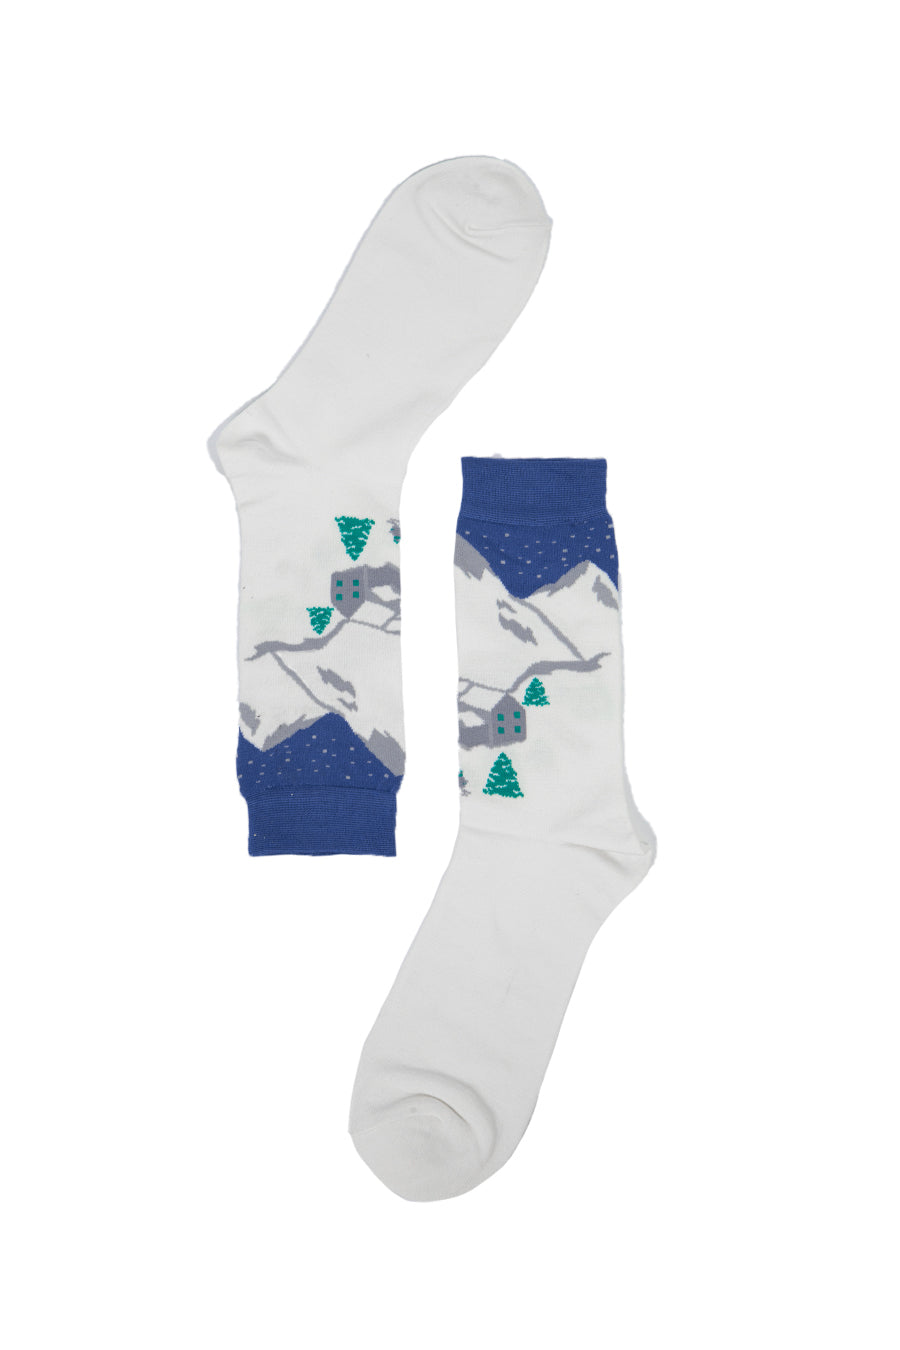 white and blue bamboo dress socks with a snowy mountain ski hill